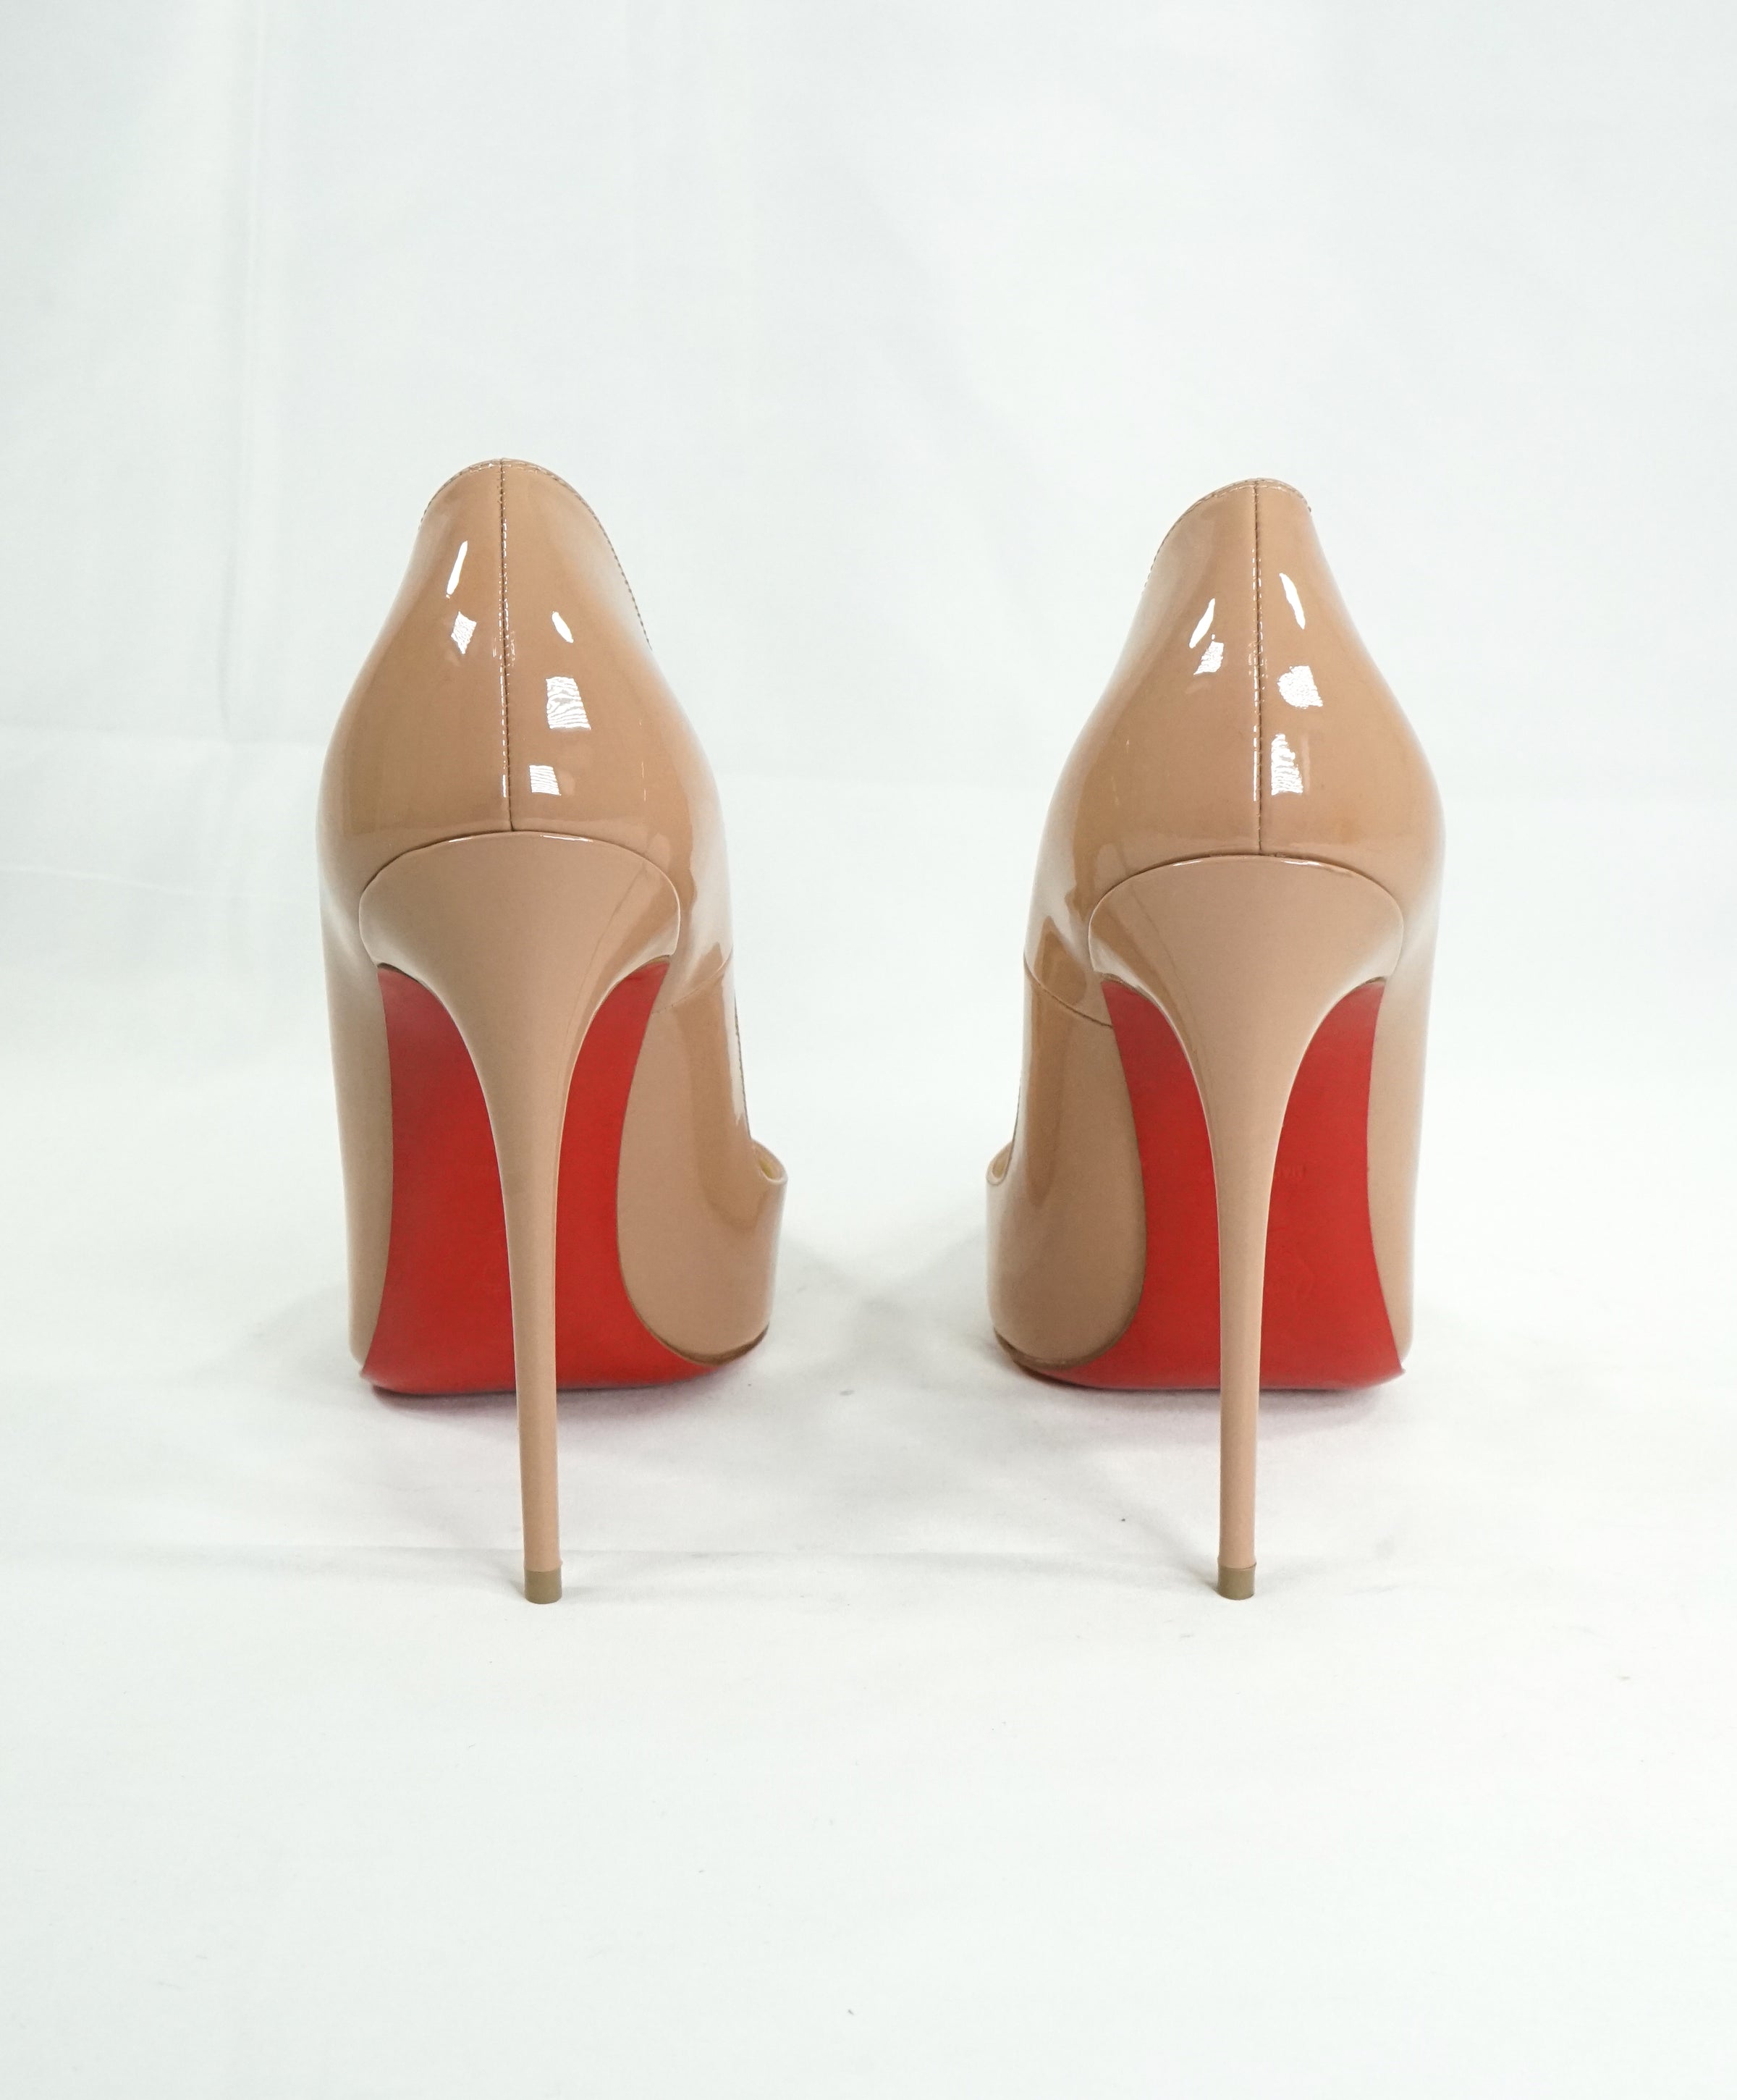 Christian Louboutin So Kate Nude Pump Size 38.5 (Fits U.S. size 7 or 7 –  Eternal Style